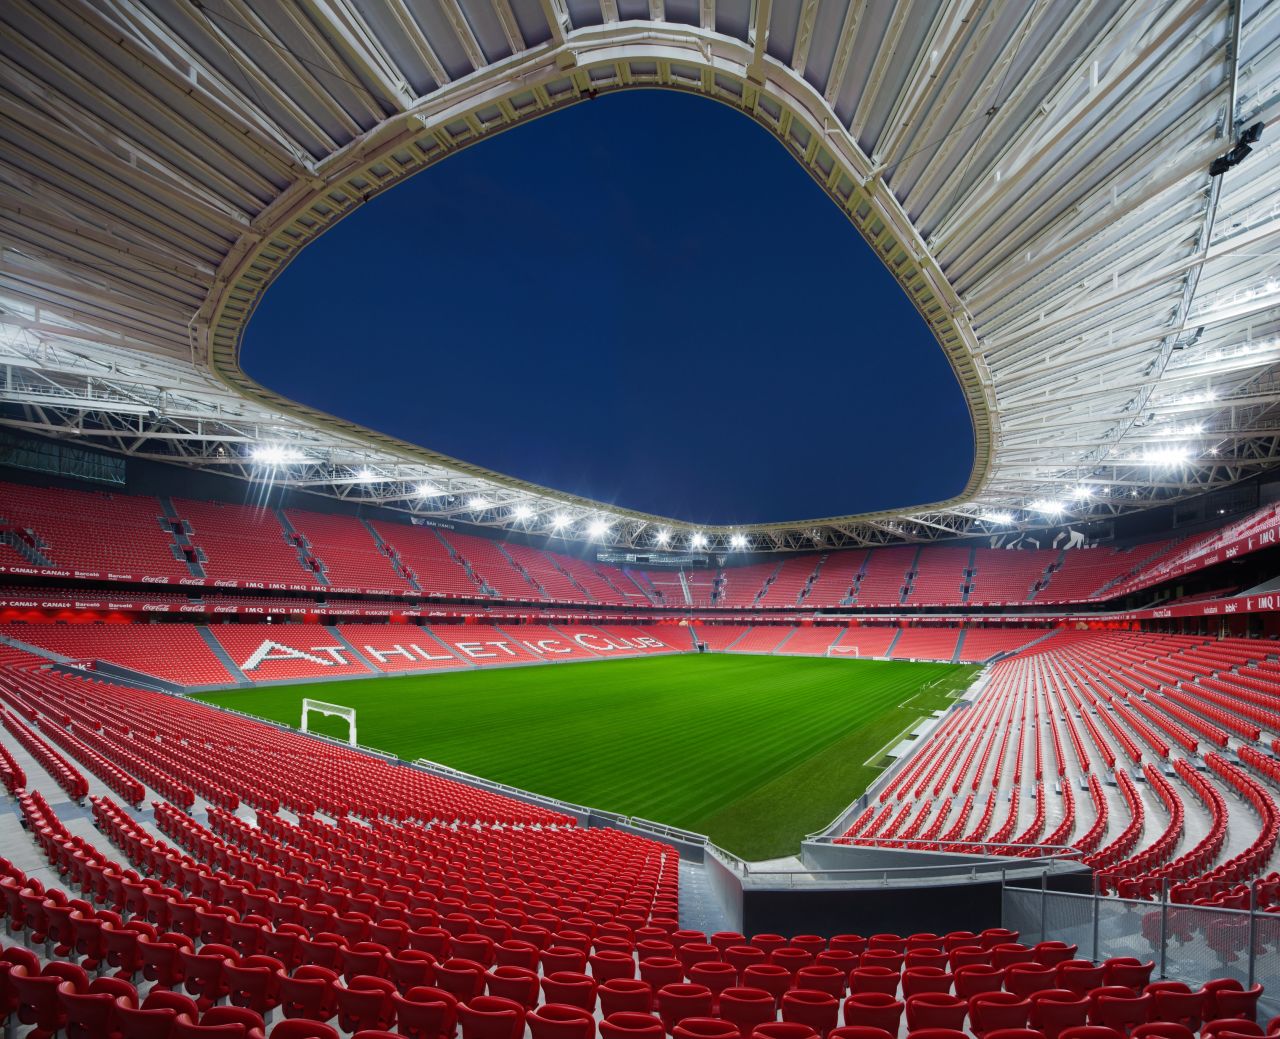 This new stadium, which opened in 2013, replaced the old San Mames as home to the Athletic Bilbao football club. Principal architect Cesar Azcarate, speaks of the challenges of designing the new structure. "The case of San Mames is very particular and interesting. We had to make a new stadium to replace the legendary San Mames, which was over 100 years old. We had to be able to move all the magic and the atmosphere of the old stadium (known as the "cathedral" of the Spanish league) into a modern one. That was our main challenge, and I think we succeeded."